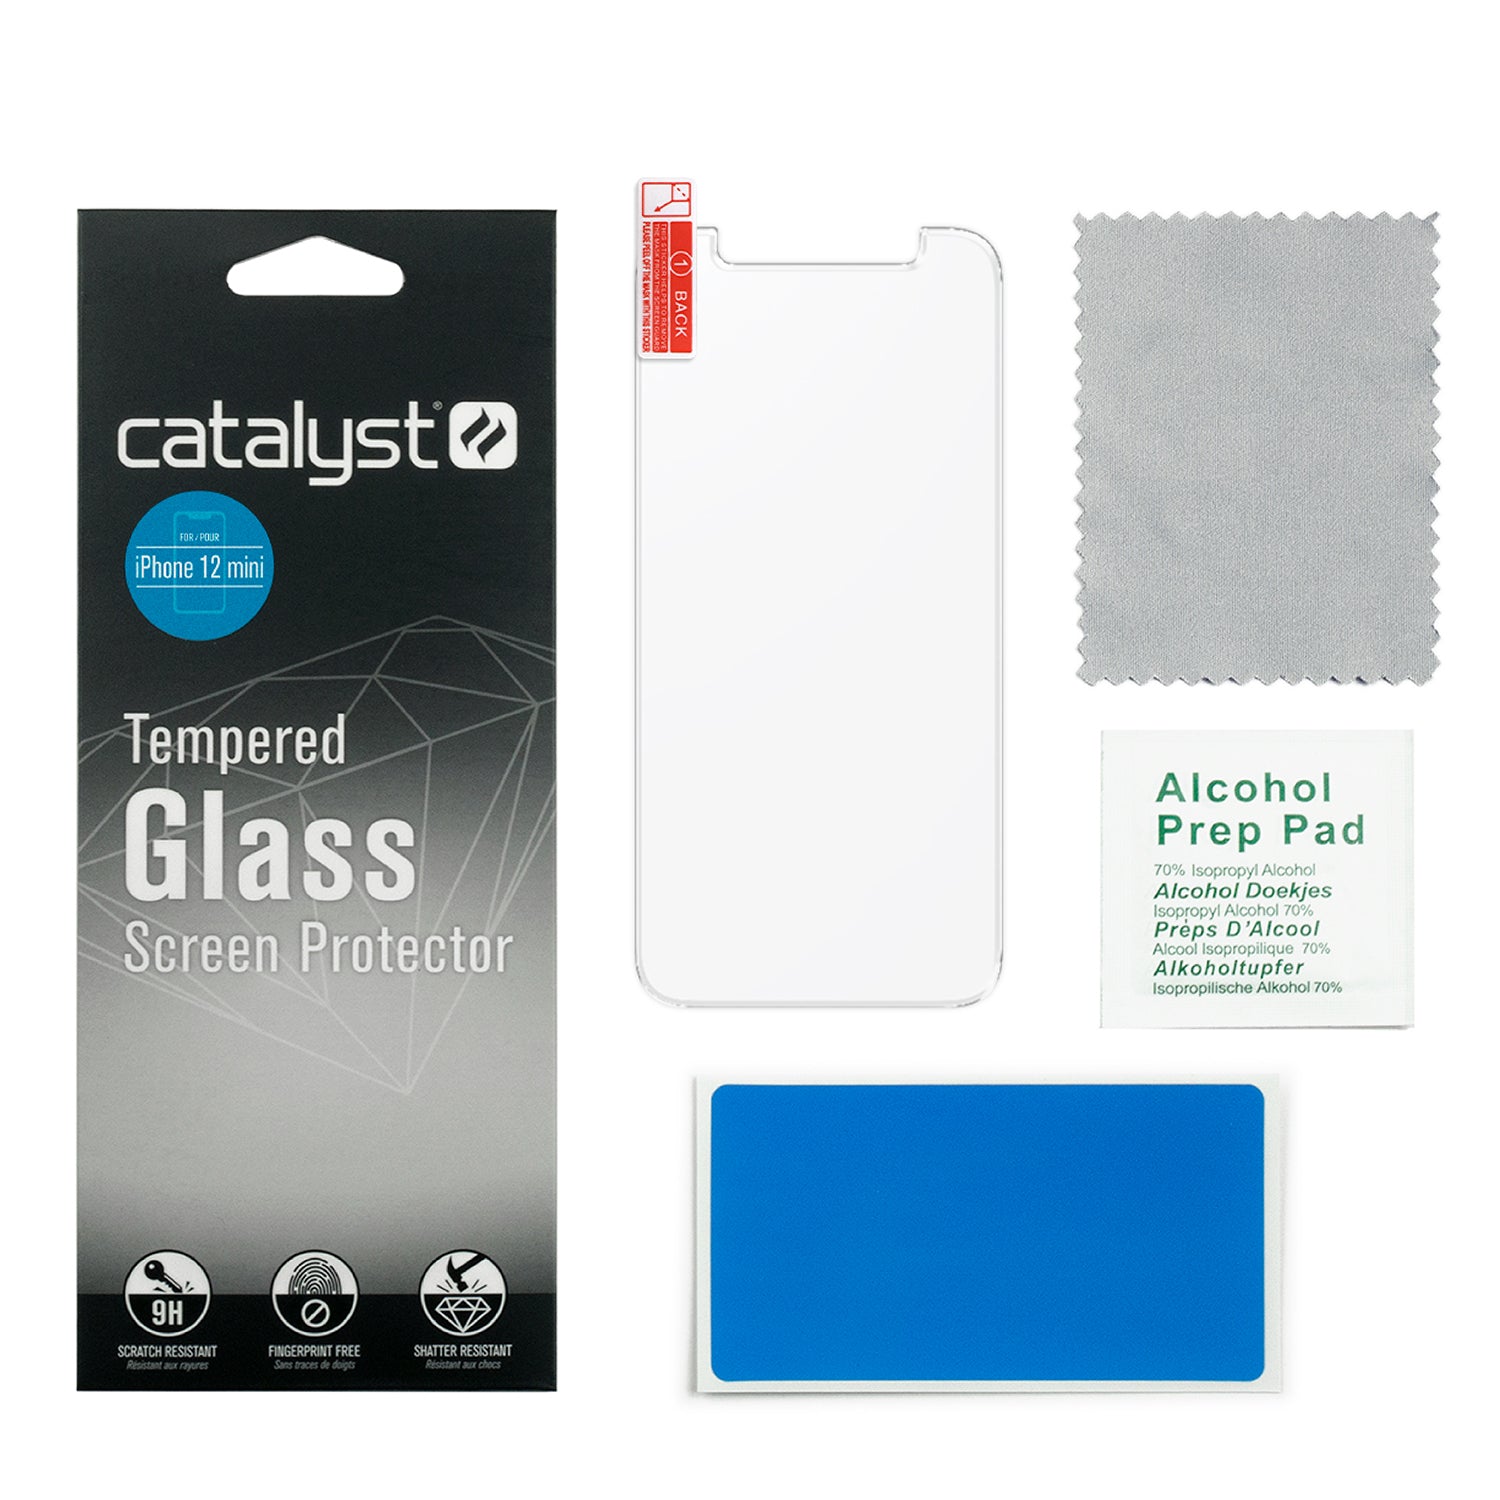 Catalyst Add a Tempered Glass Screen Protector for iphone 12 mini inside the box includes packaging screen protector cleaning cloth alcohol wipe dust removal sticker text reads packaging screen protector cleaning cloth alcohol wipe dust removal sticker alcohol prep pad